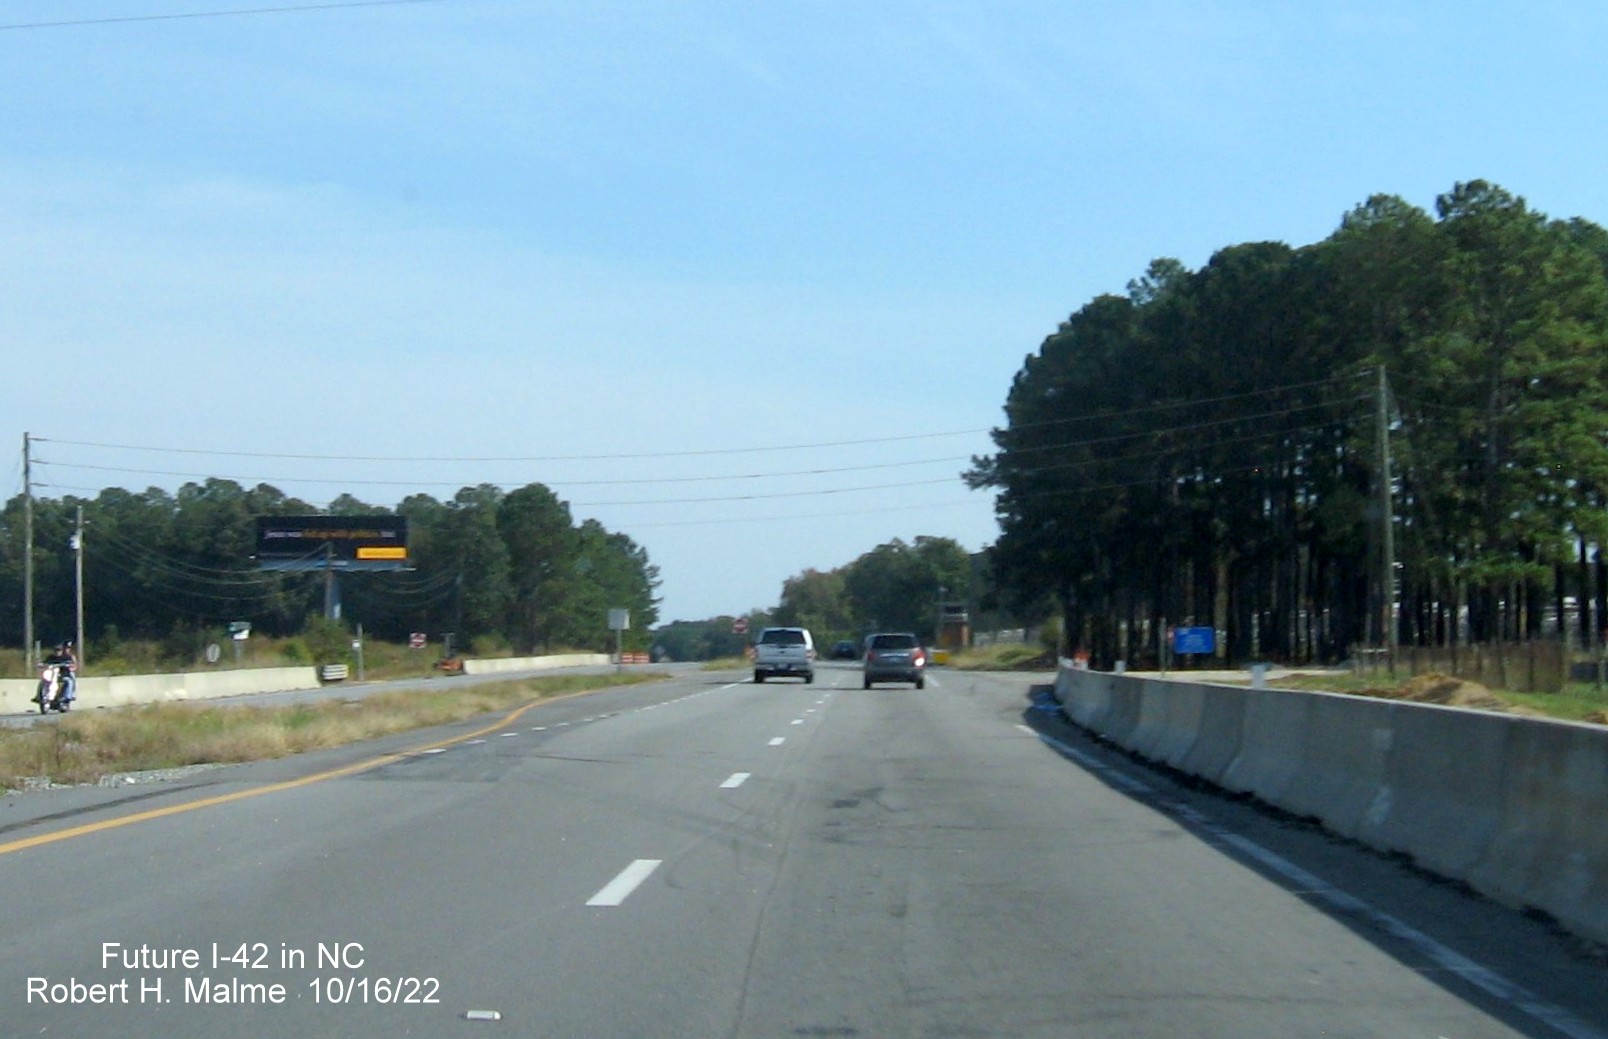 Image of future I-42 East construction along US 70 East approaching the Neuse River bridge in Smithfield, October 2022